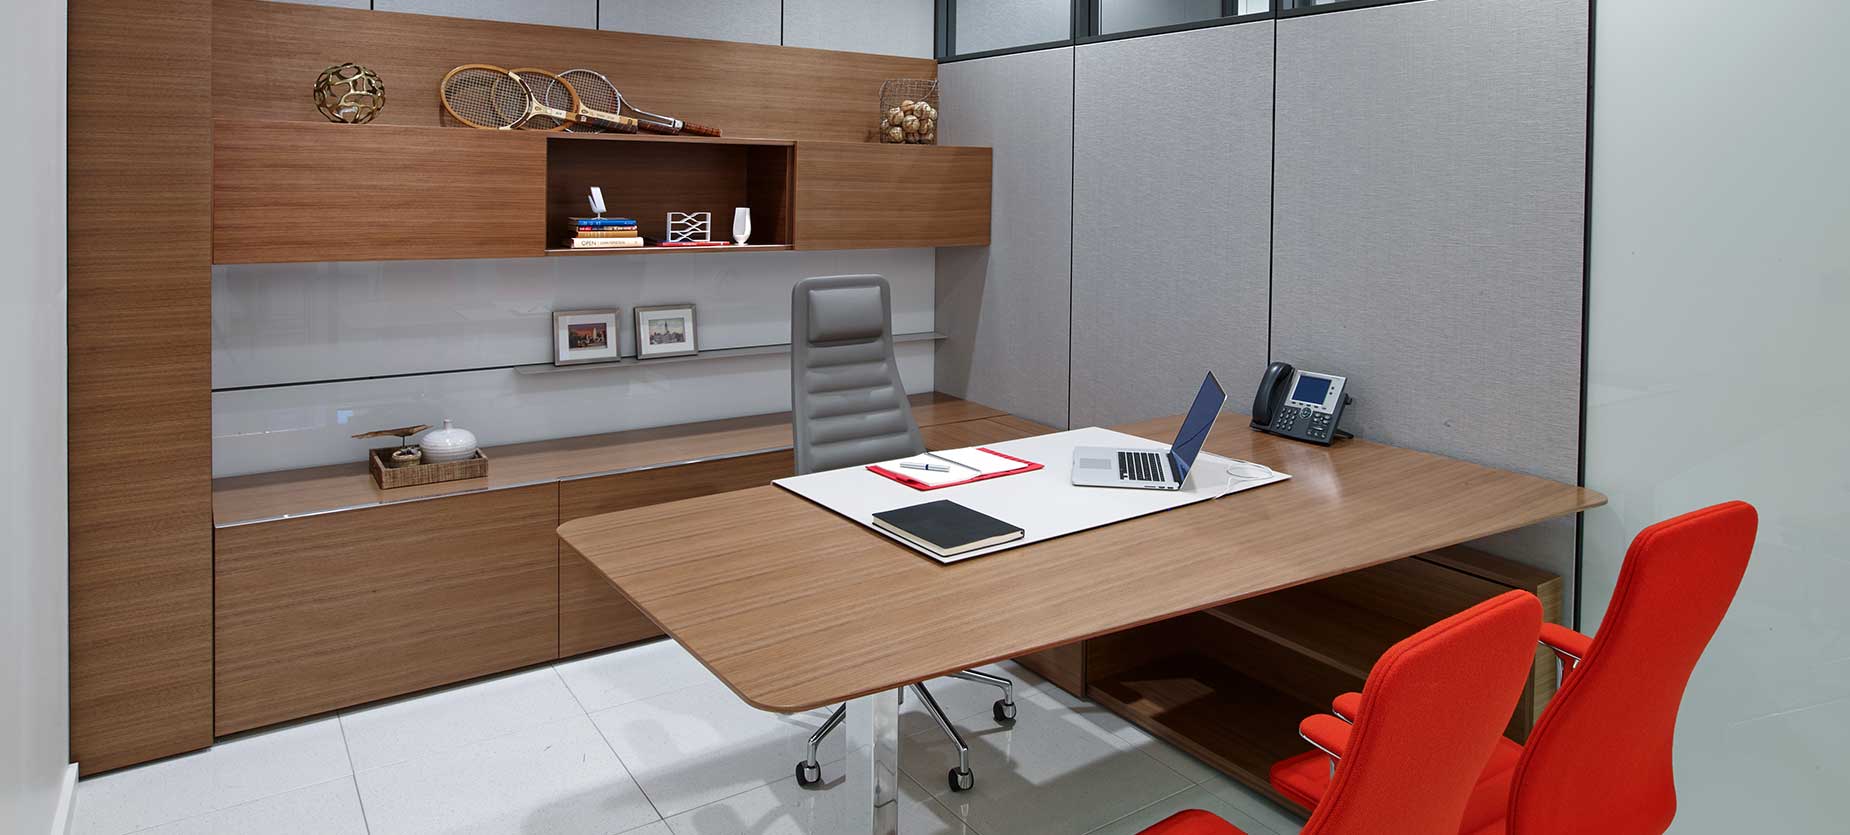 Suite private office offers a look of prestige and functionality, including a height adjustable table and power access within the work surface. Seating includes the Lotus high-back executive armchair and Lotus mid-back chairs.